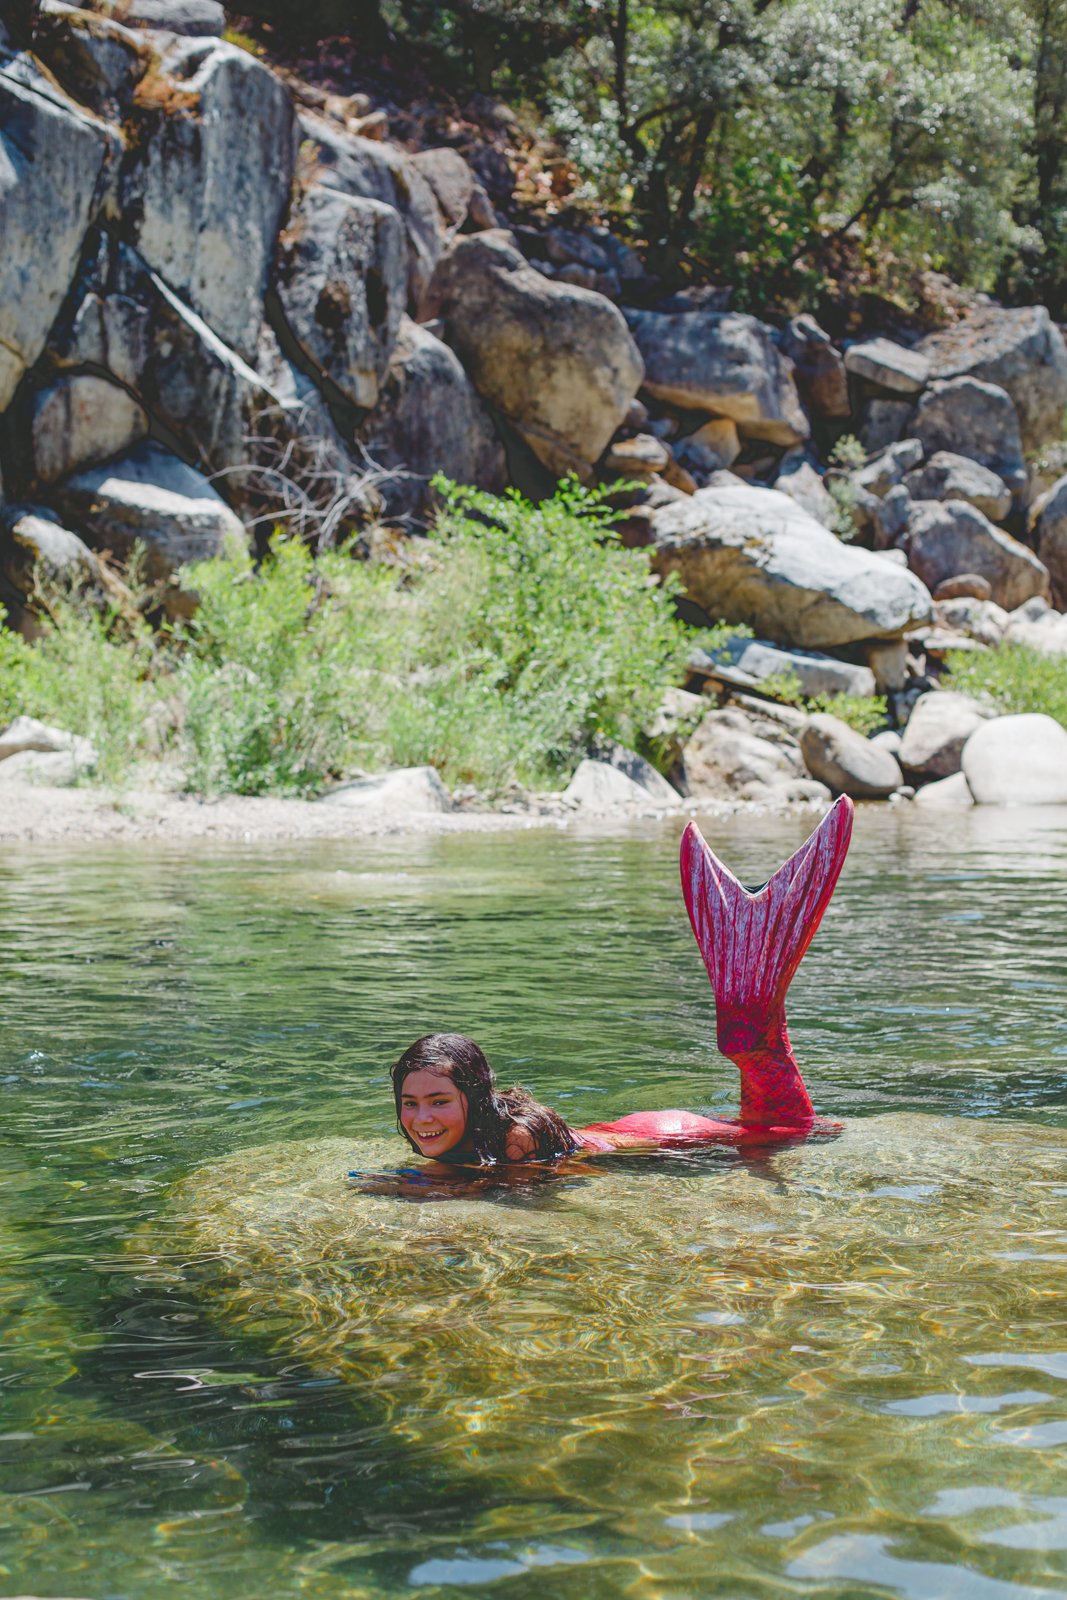 Mermaid in the Yuba River, Nevada City, showing off her Fin Fun Mermaid Tail